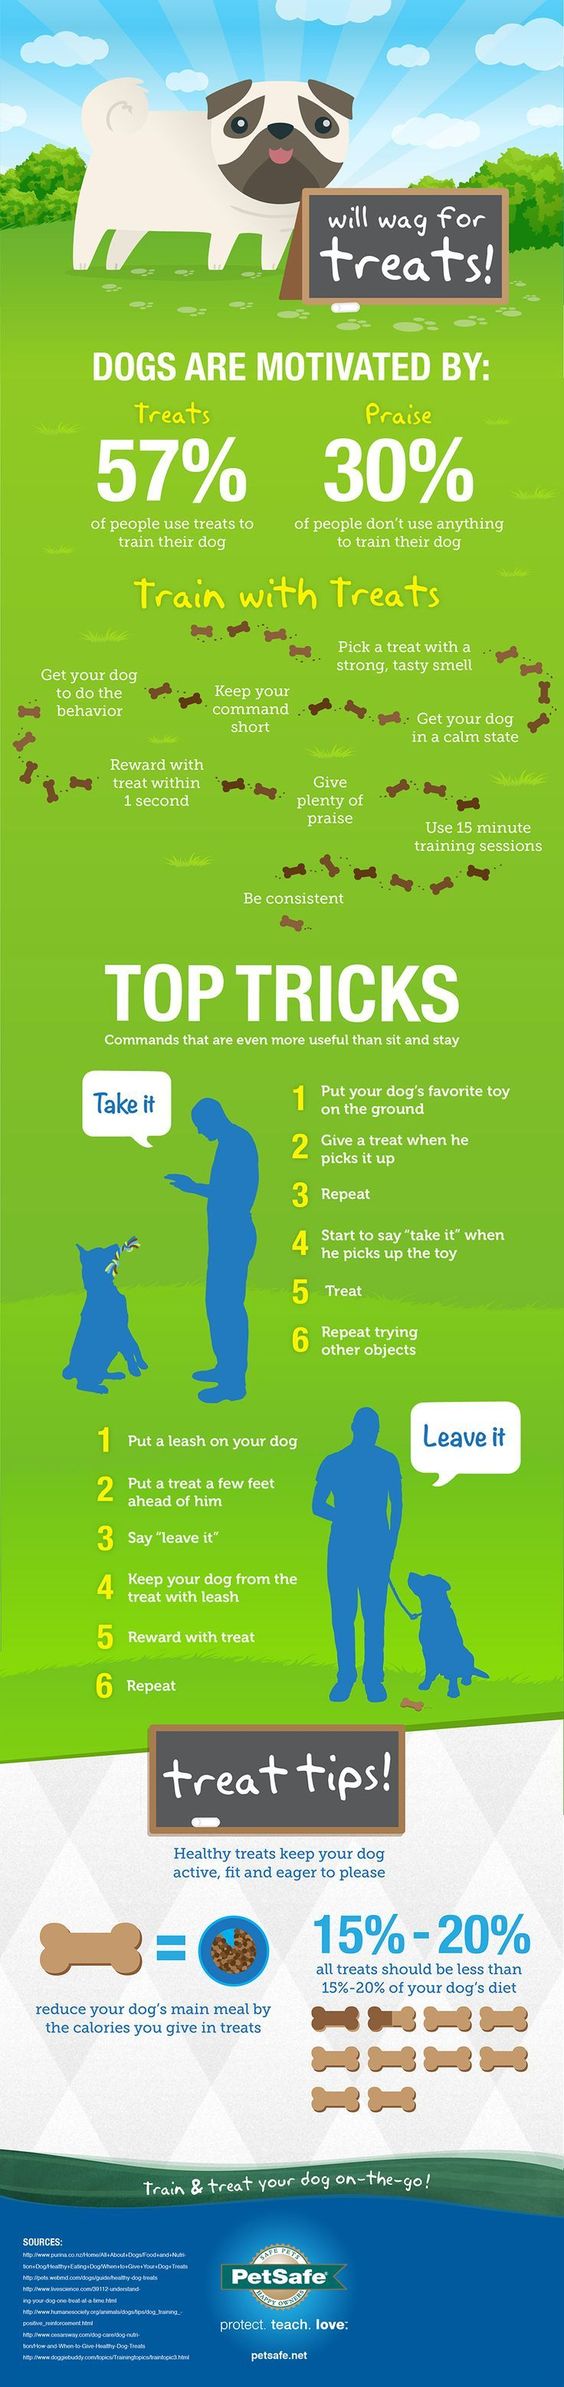 Great dog training tips from PetSafe -- training with treats, praise; teaching 